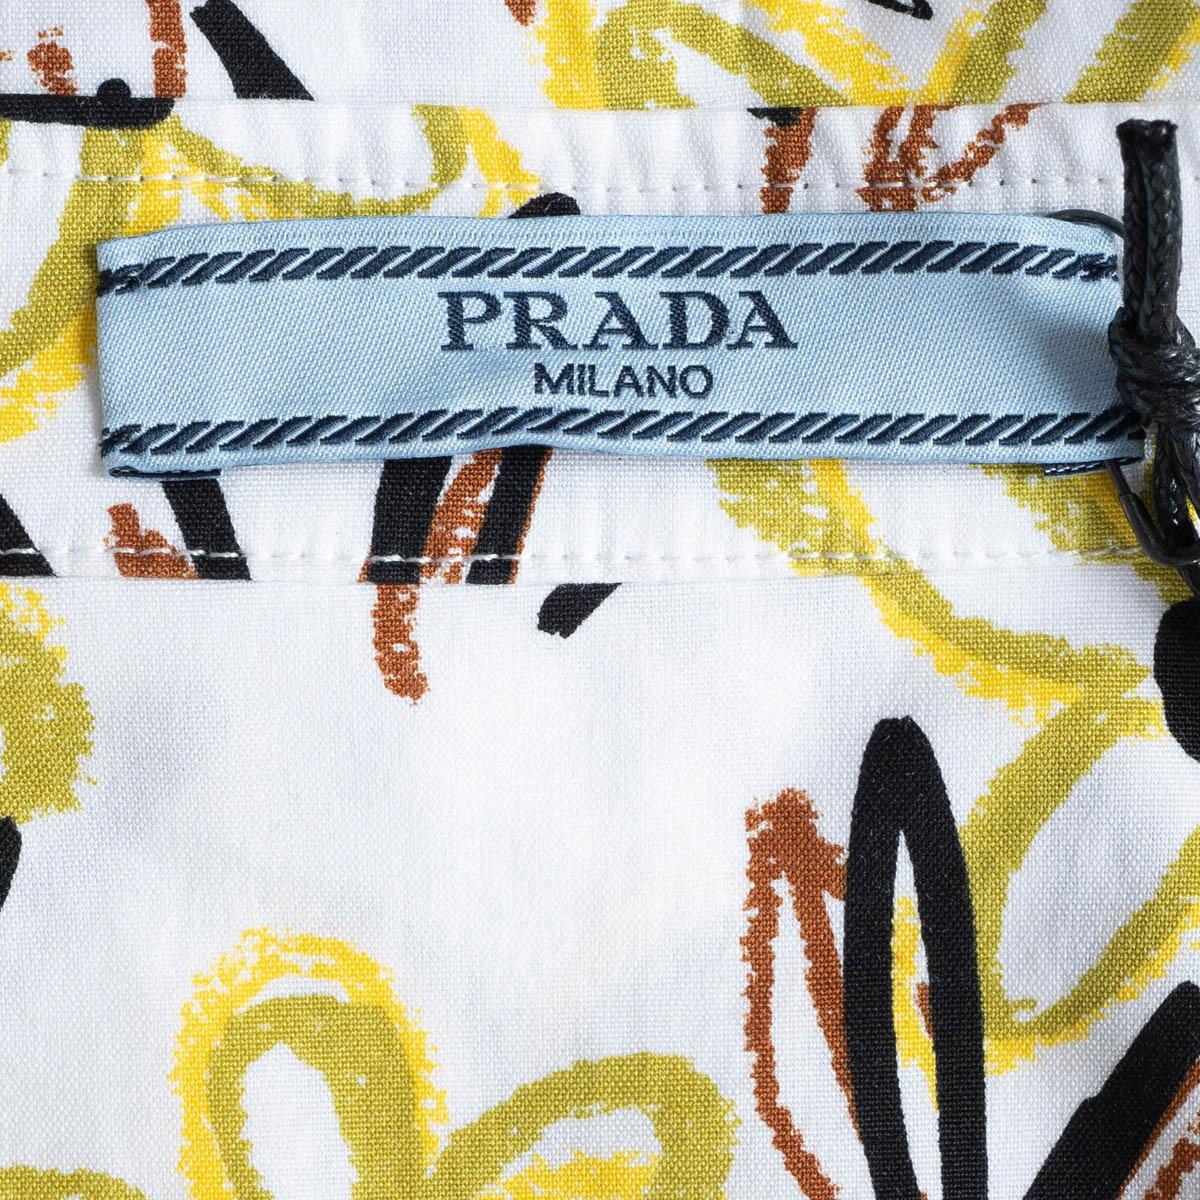 PRADA white & yellow cotton FLORAL SHIRT & SKIRT SET 42 M In Excellent Condition For Sale In Zürich, CH